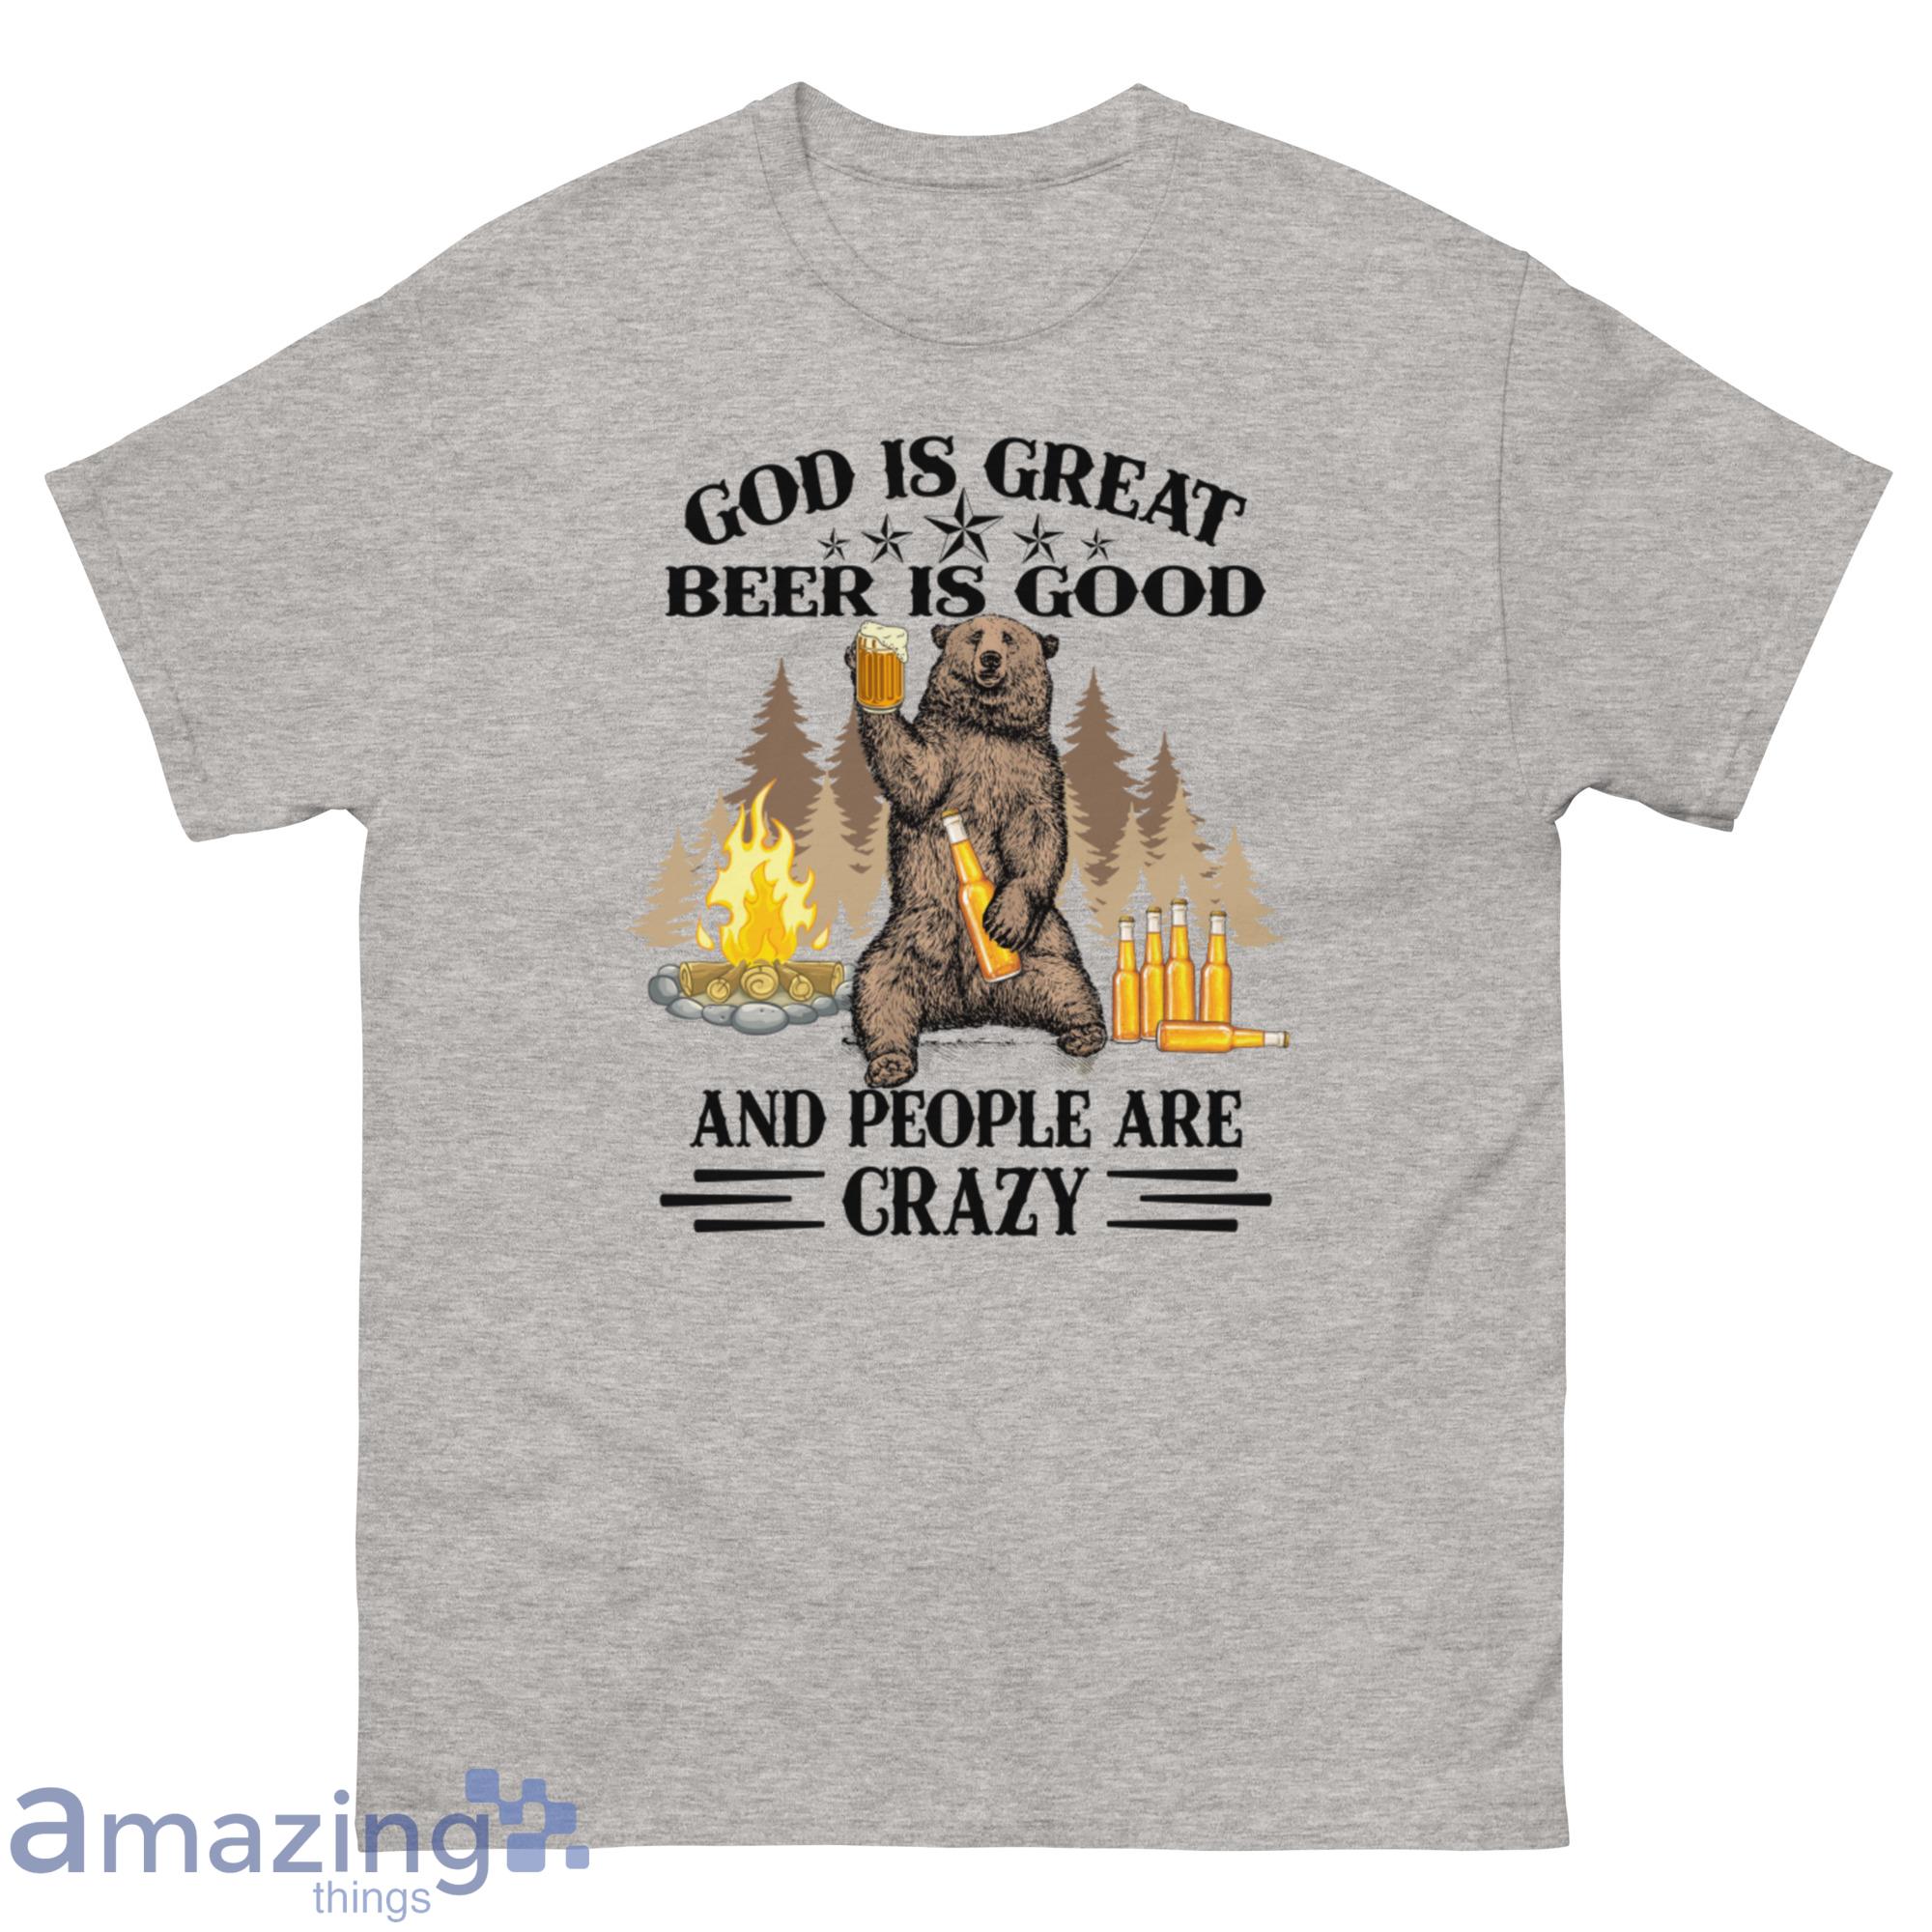 Bear Drink Beer God Is Great Beer Is Good, And People Are Crazy Shirt - G500 Men’s Classic T-Shirt